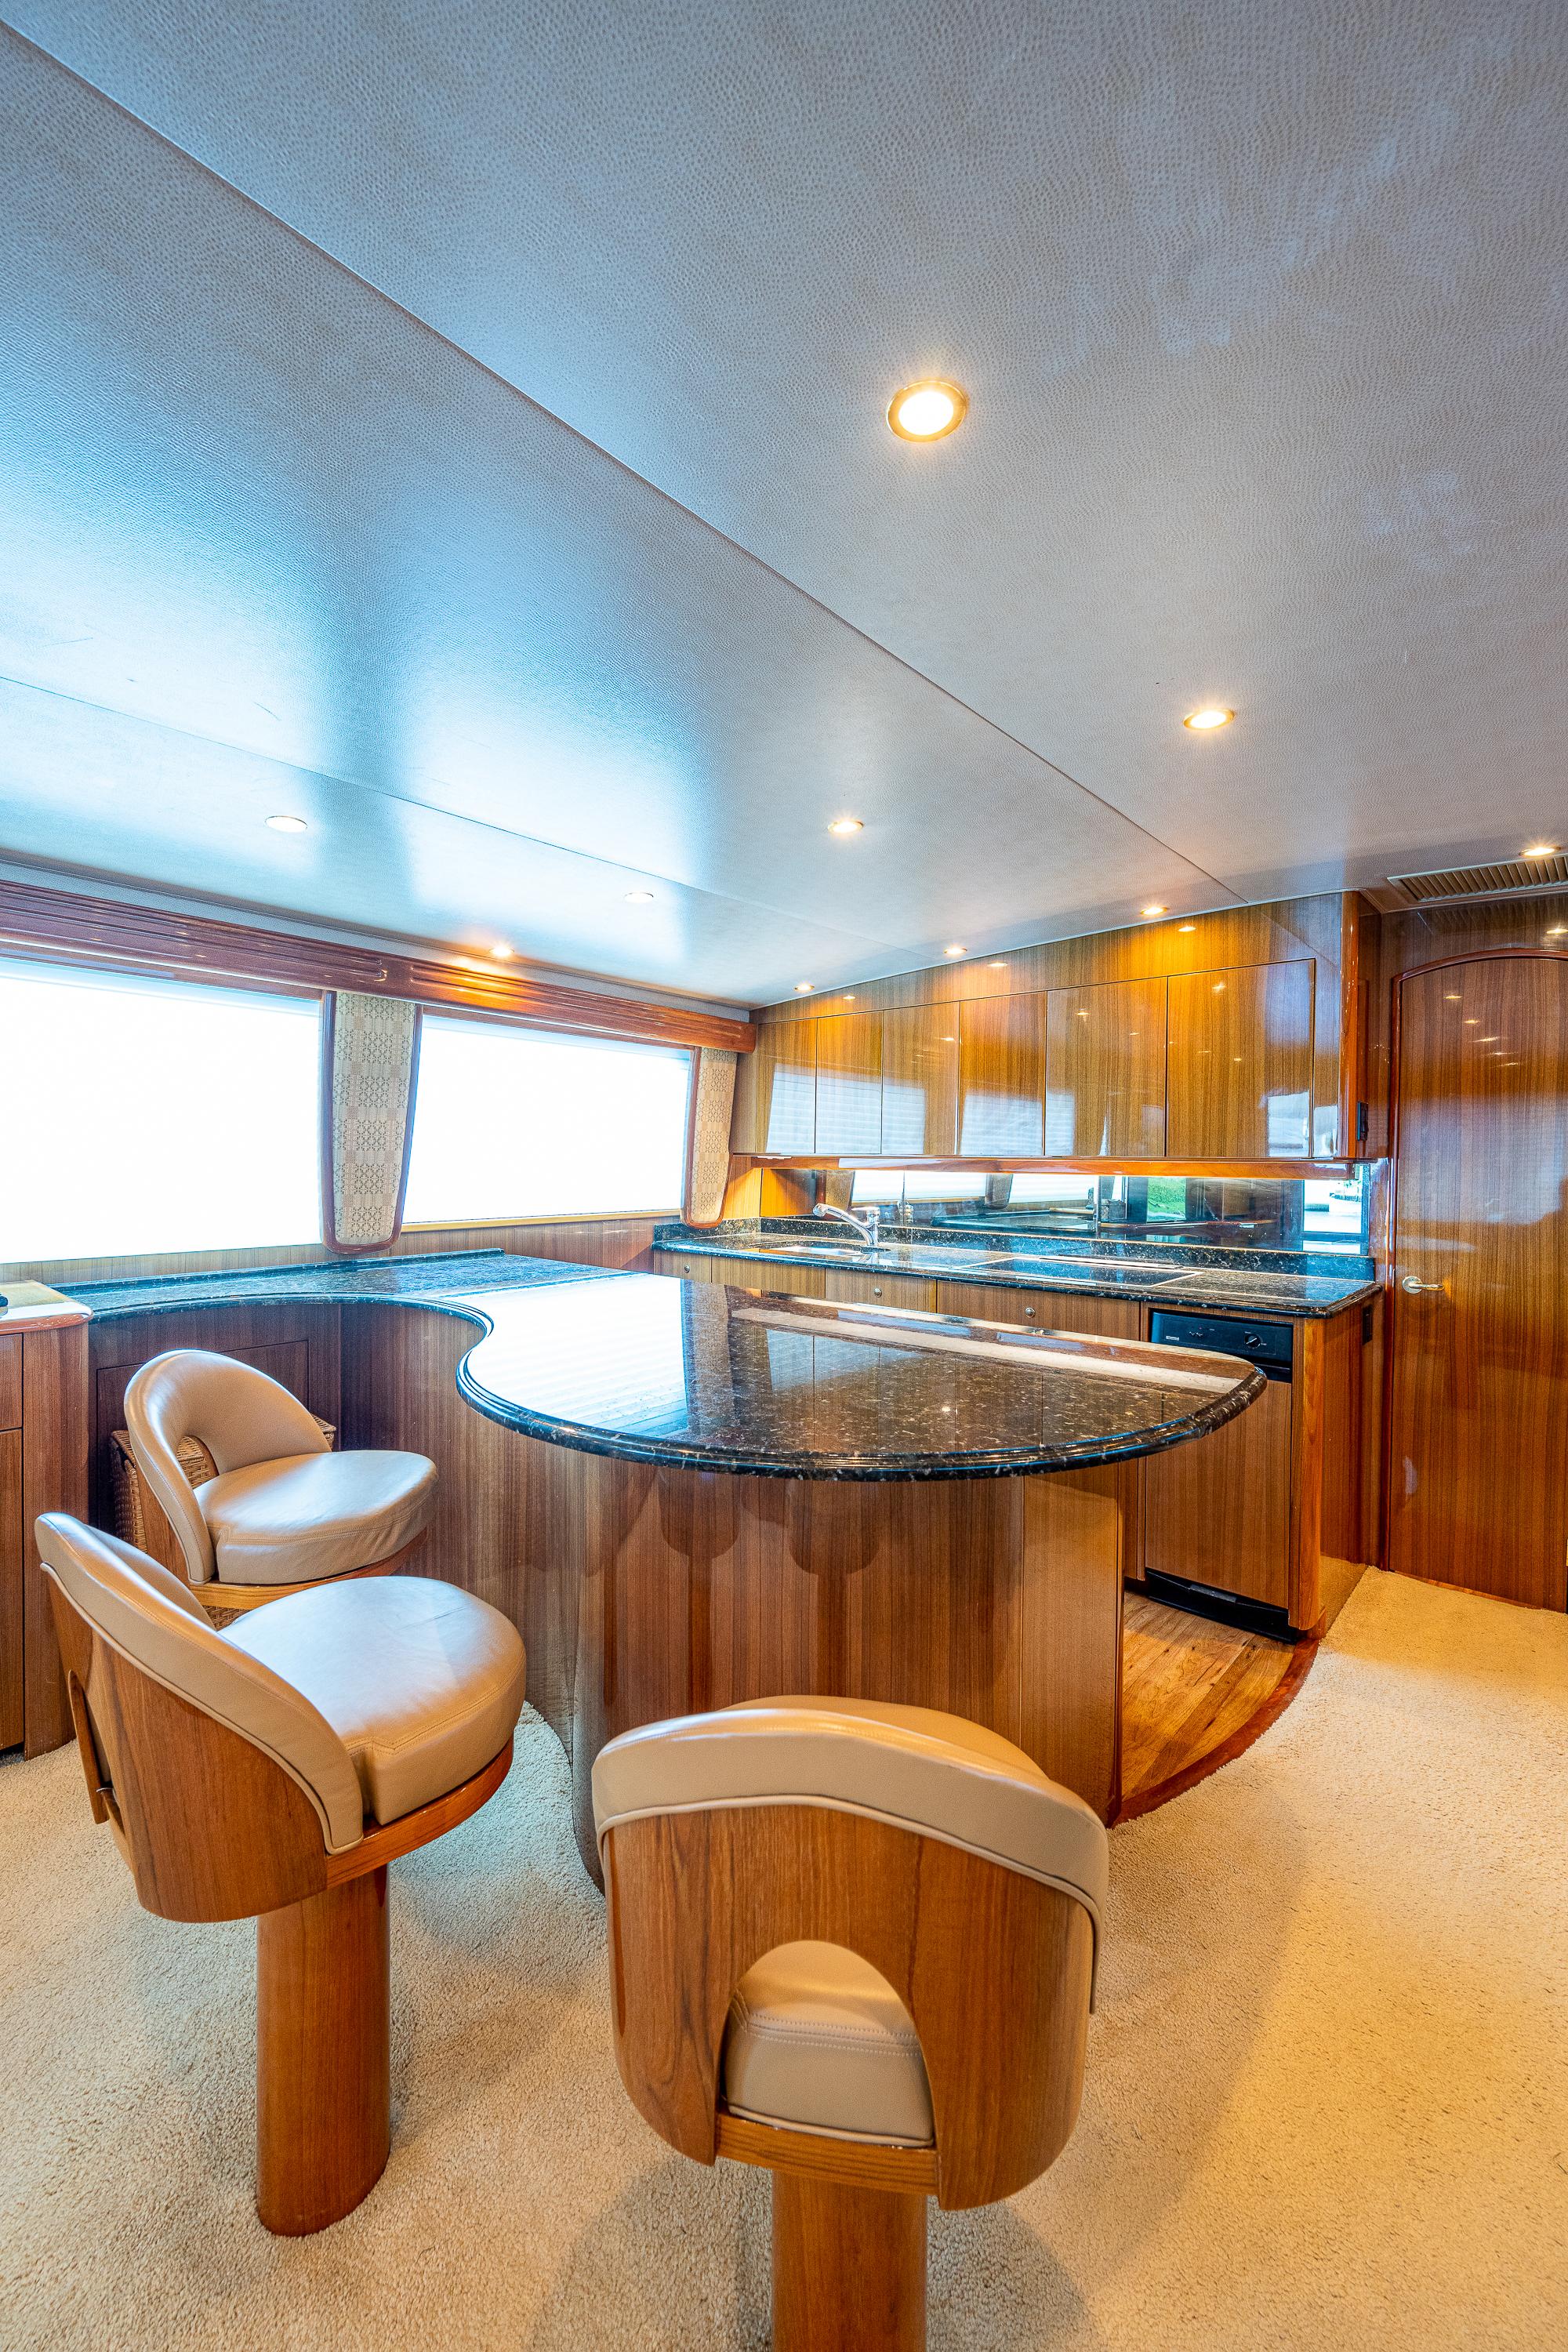 Viking 74 Convertible Reel Estate - Galley, Counter Seating, 3 Couter Height Stools